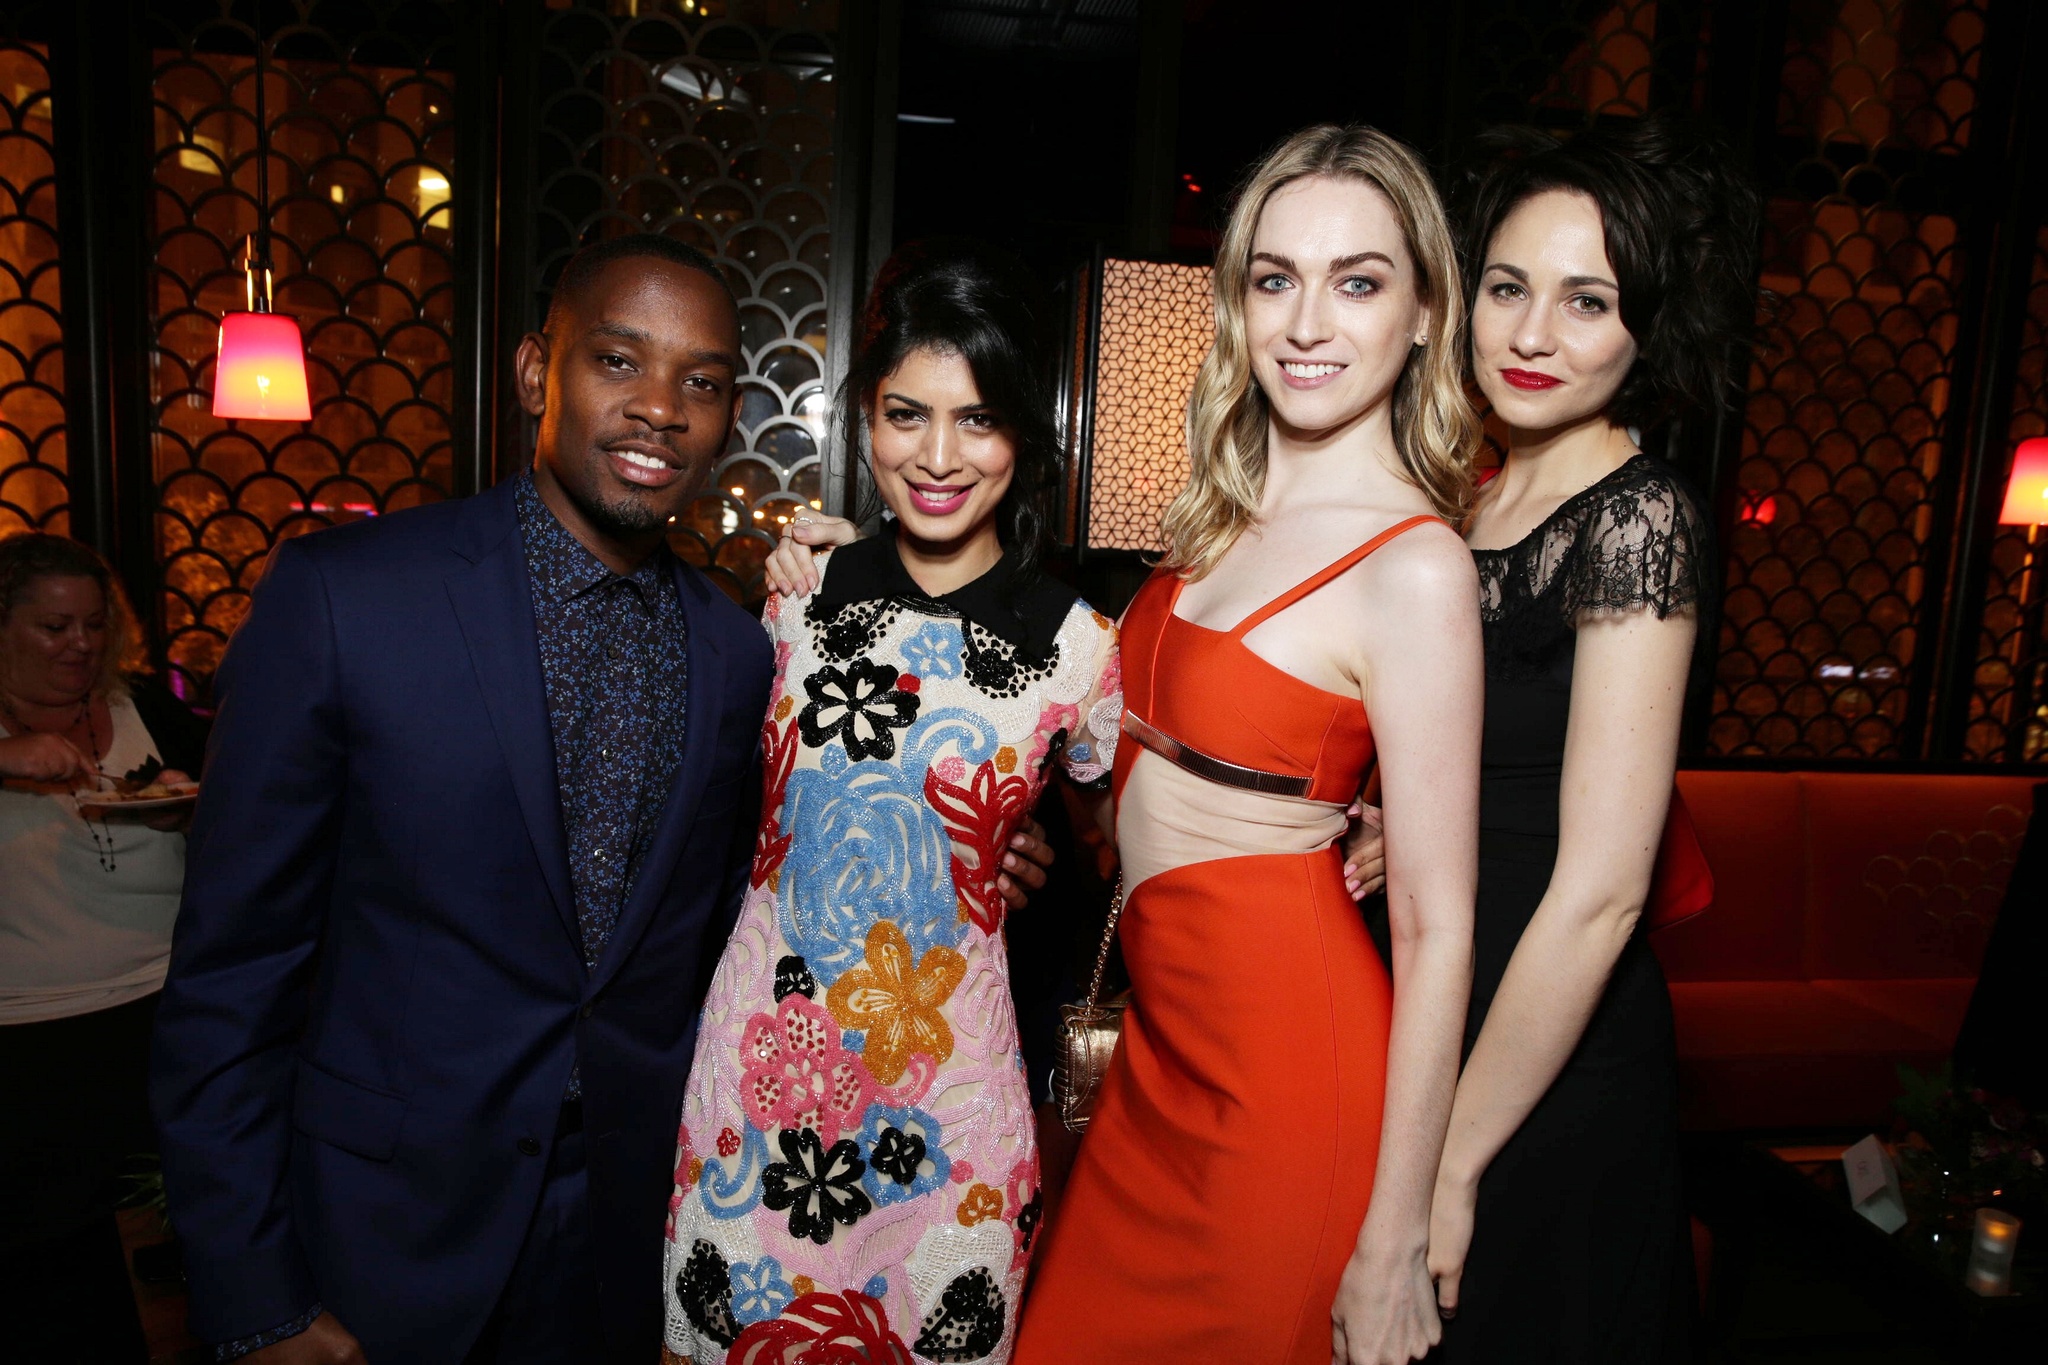 Aml Ameen, Tuppence Middleton, Tina Desai and Jamie Clayton at event of Sense8 (2015)